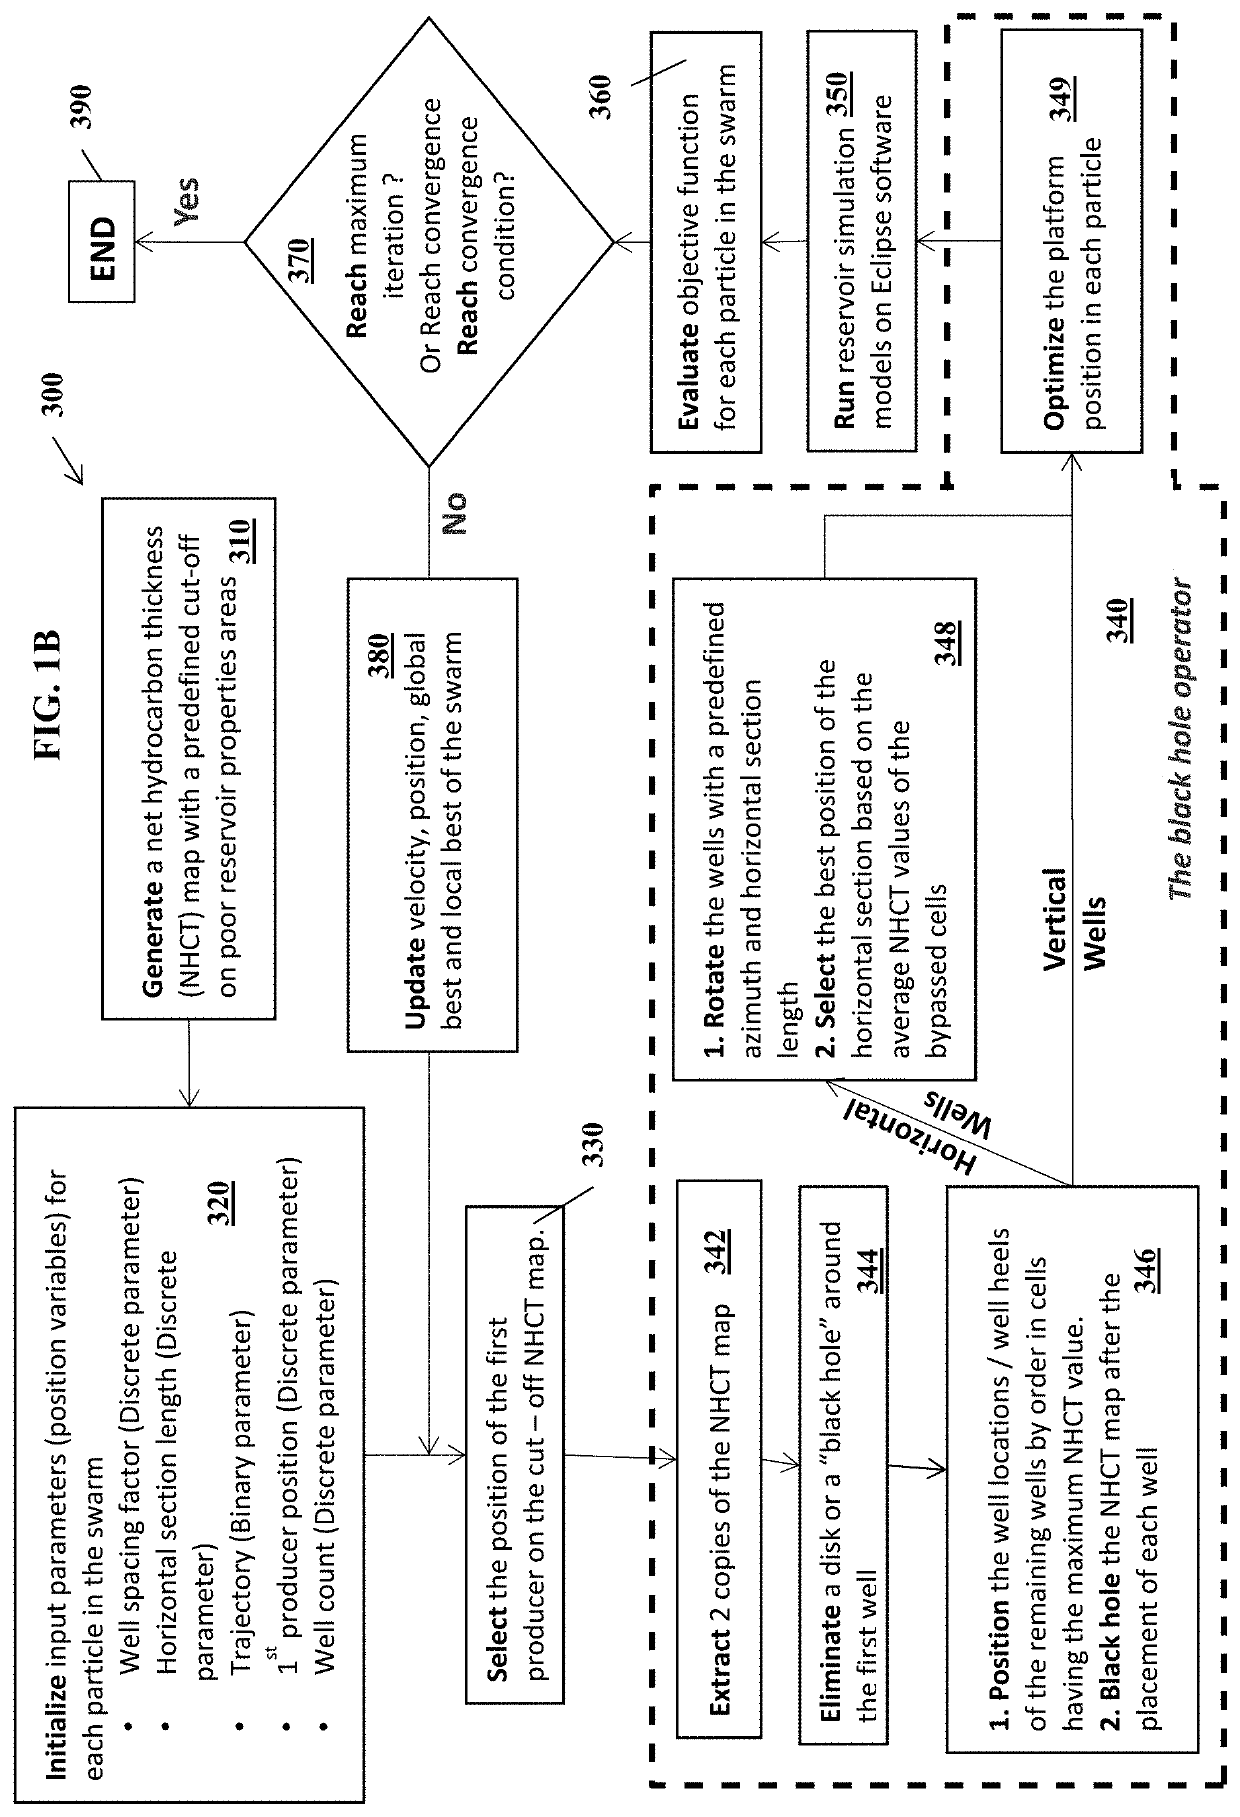 Black hole particle swarm optimization for optimal well placement in field development planning and methods of use